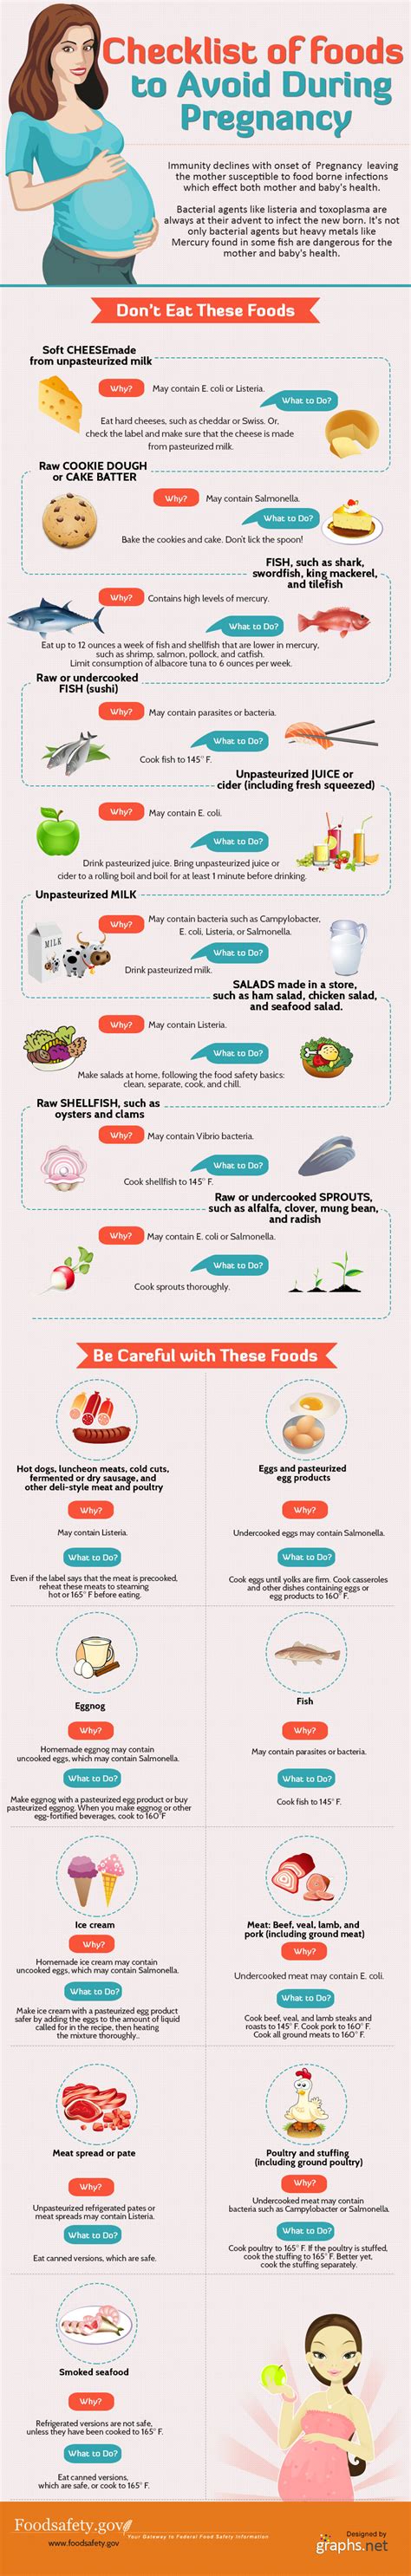 Moreover, it does not like it at this stage. Foods To Avoid During Pregnancy | Visual.ly